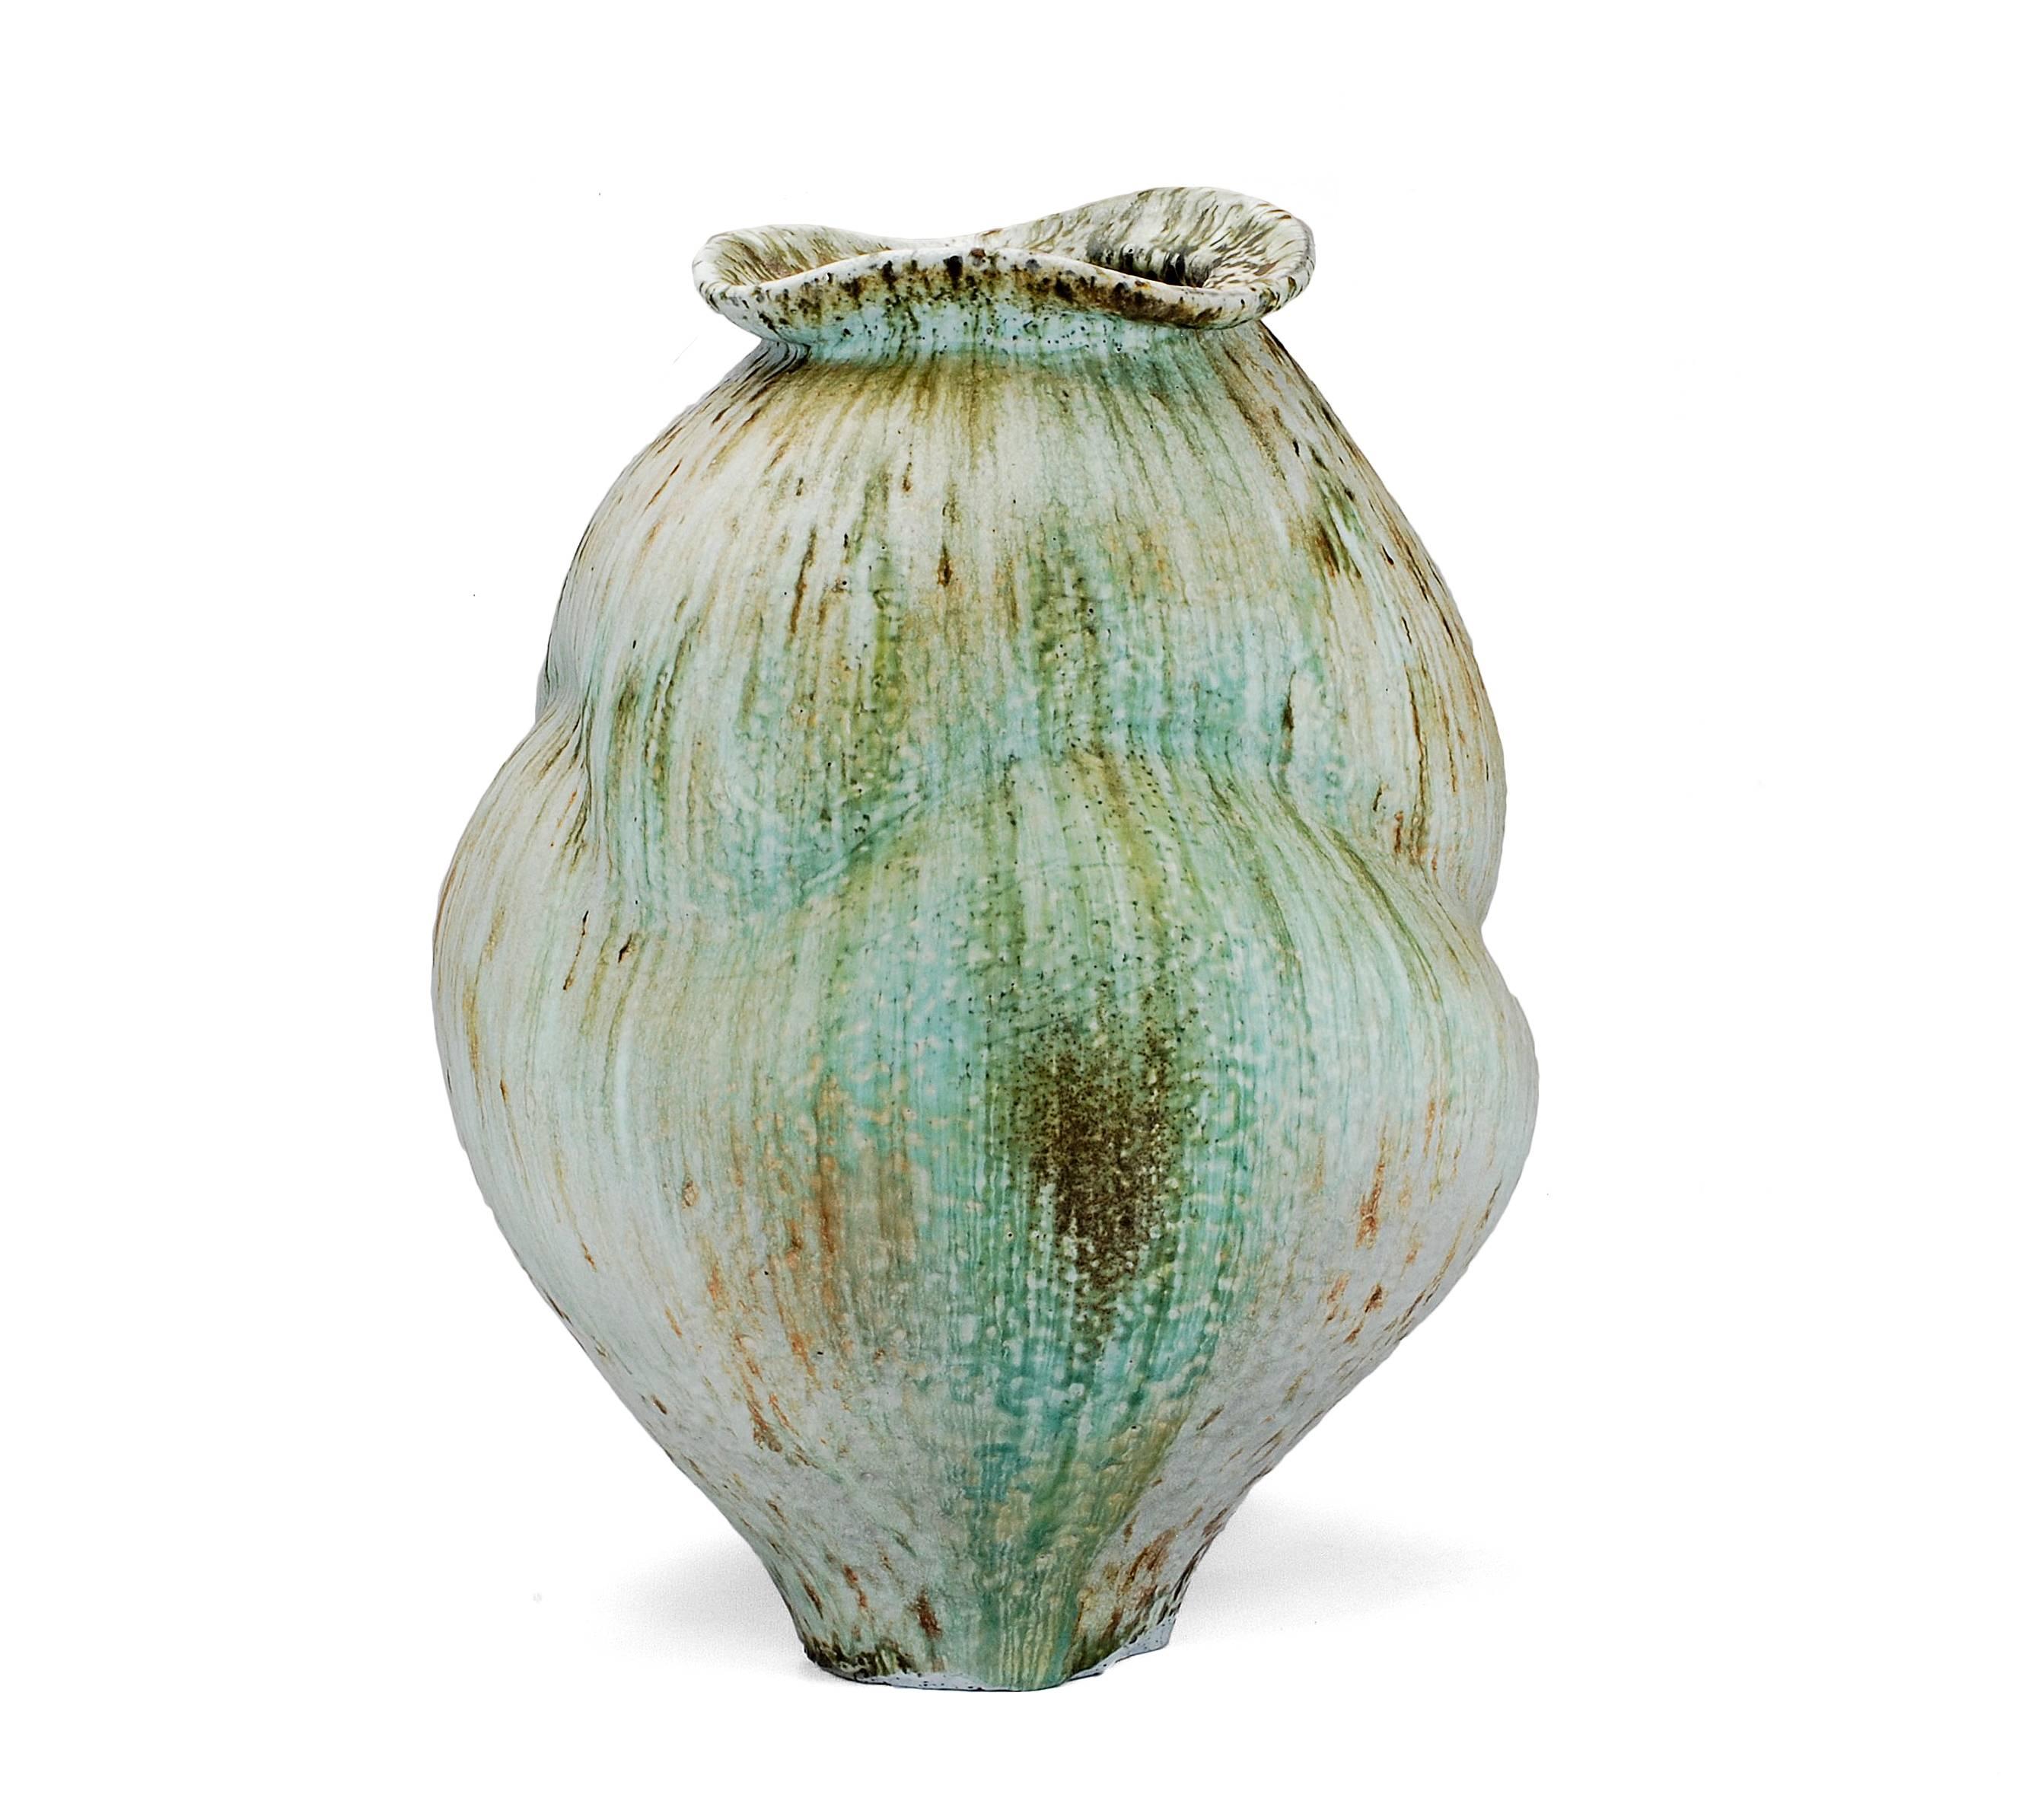 Large Moon Jar with Shino Glaze, 24 inches tall - Sculpture by Perry Haas